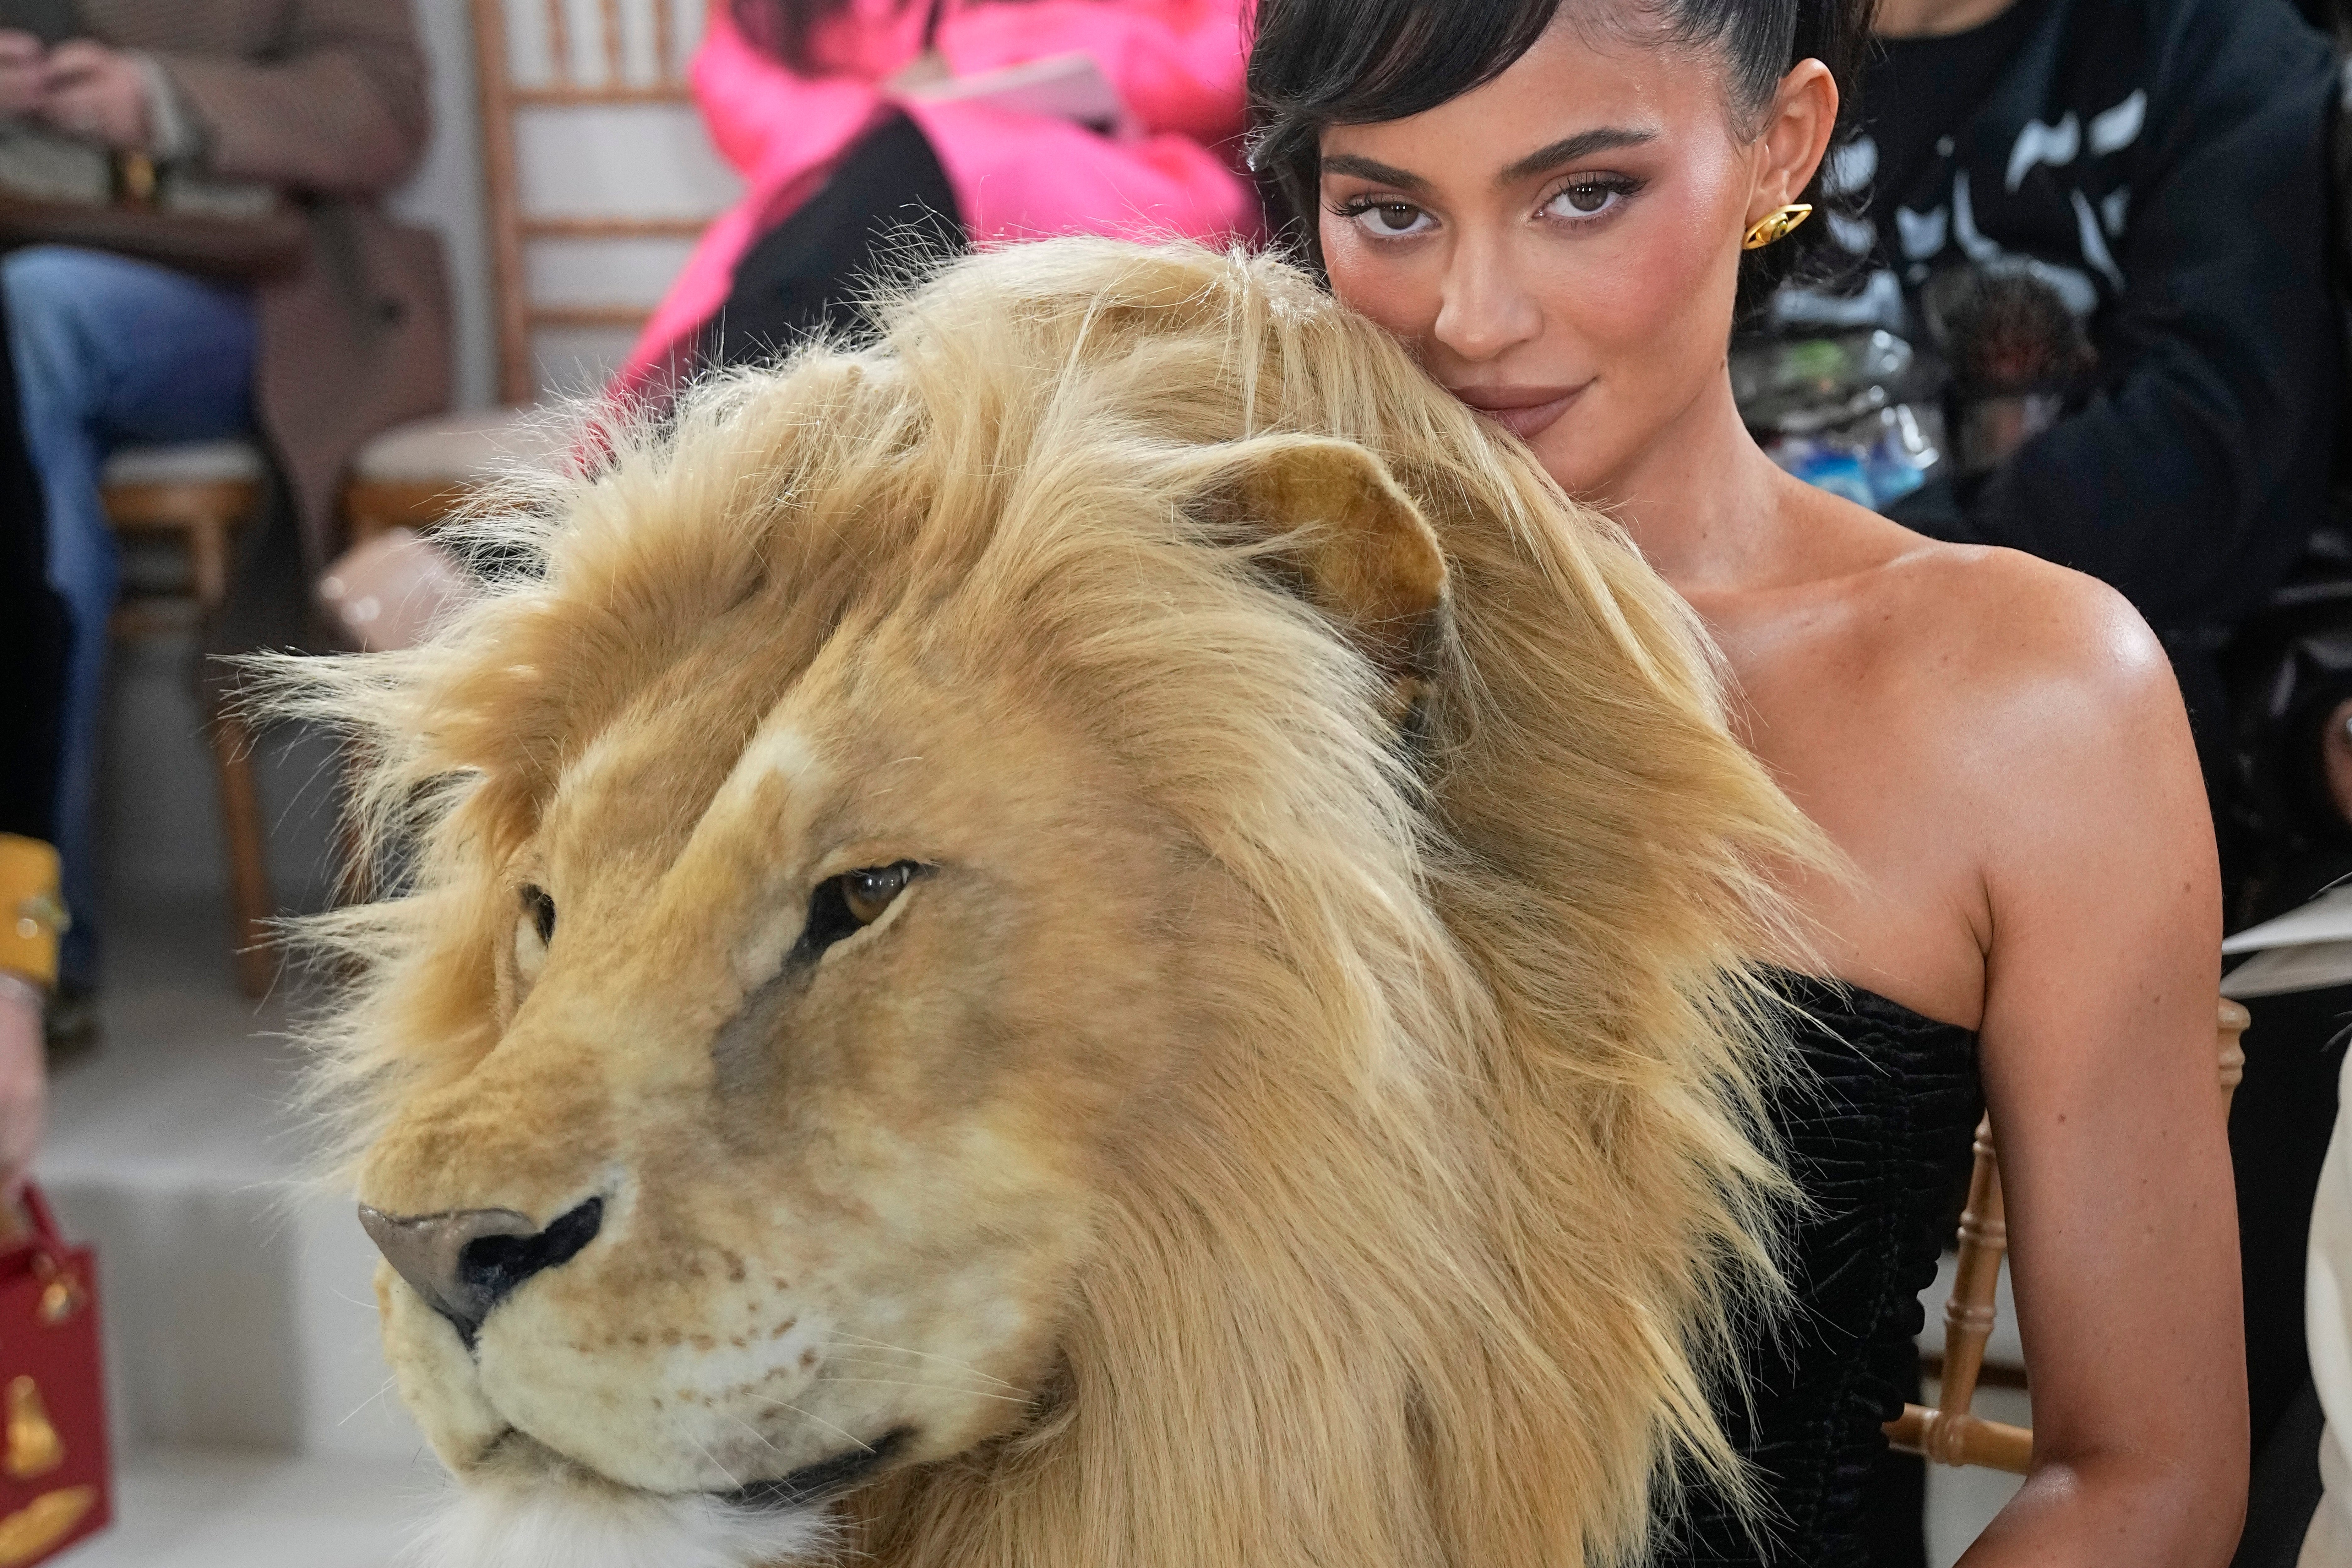 Kylie Jenner wore the Italian brand’s lion design to attend Couture Fashion Week in Paris